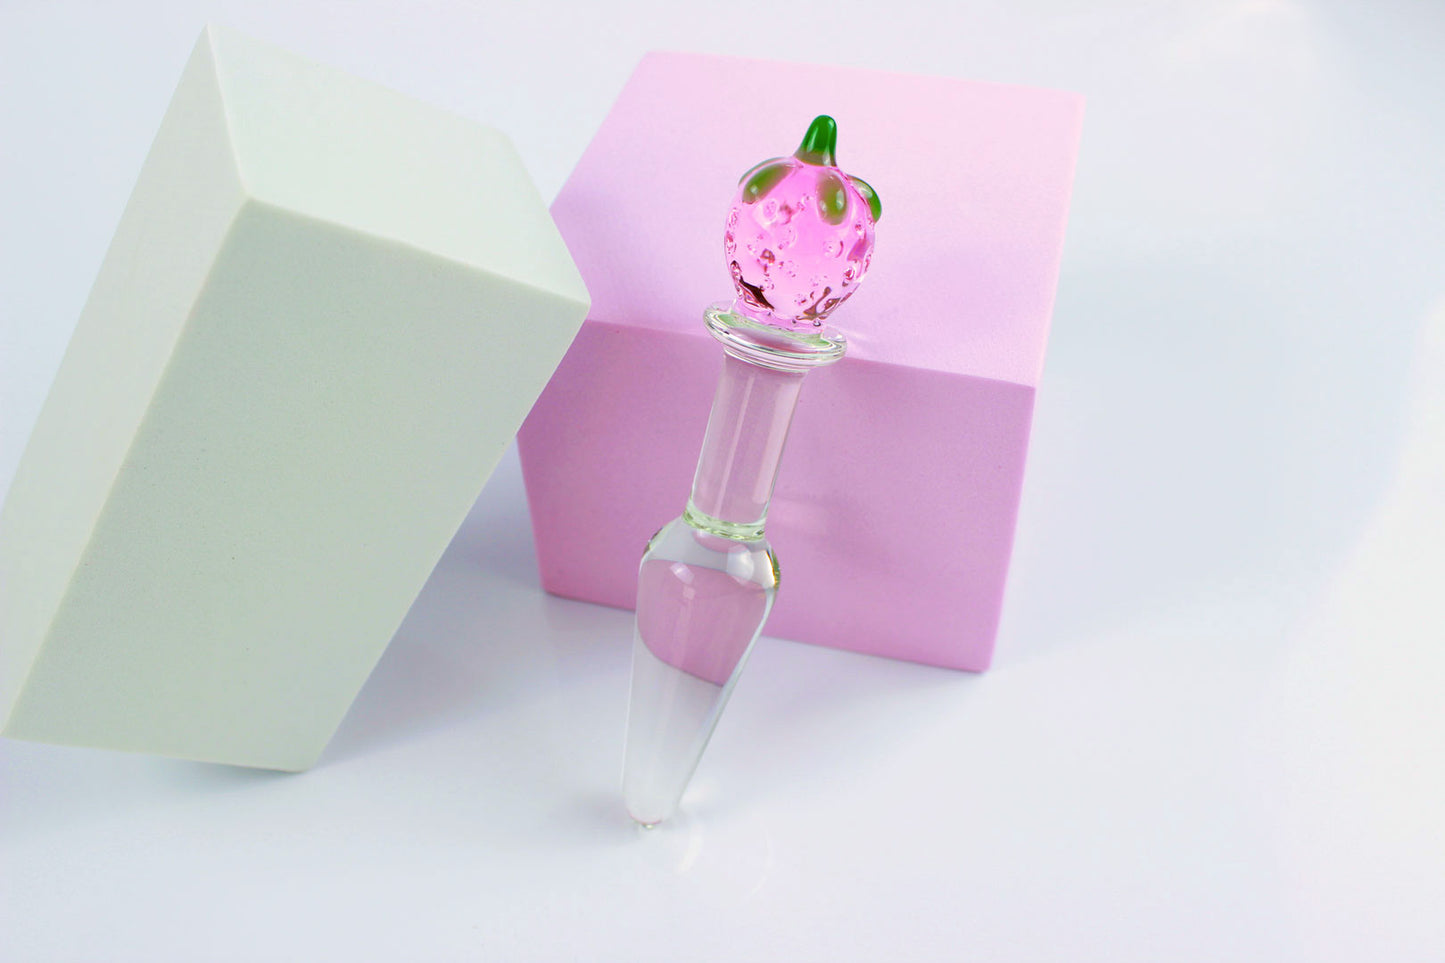 Strawberry tapered glass butt plug against a pink block and white background.